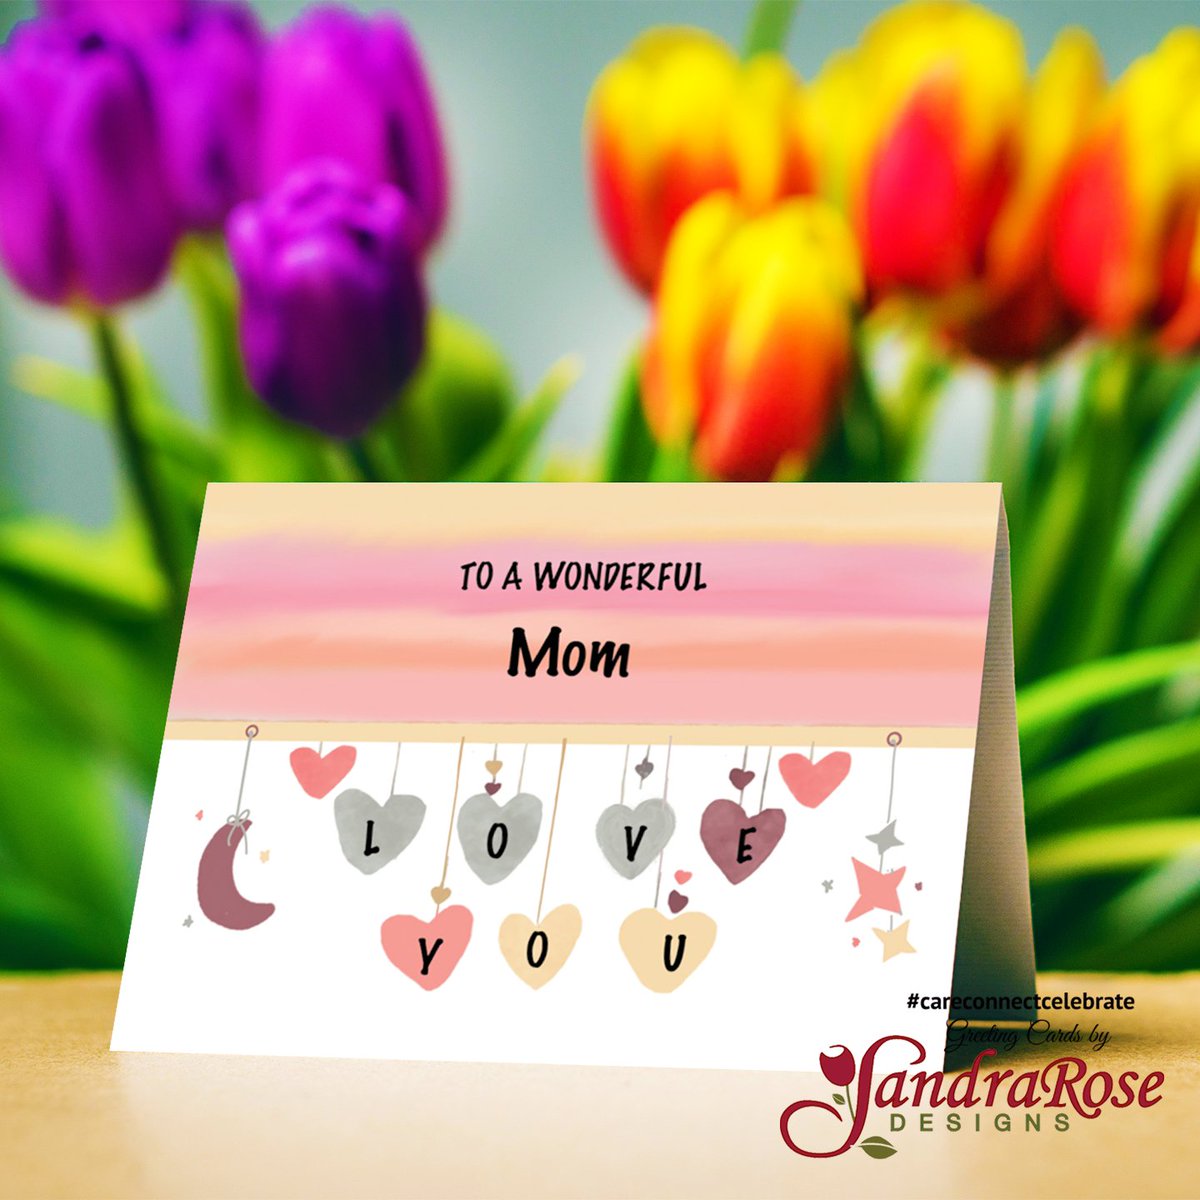 With its charming design and personalized touch, this birthday card for your mom is sure to make her feel cherished and loved. As she basks in the warmth of your affection. #CareConnectCelebrate #SandraRoseDesigns
@GCUniverse #Greetingcards #Greetingcard greetingcarduniverse.com/mom-birthday-c…